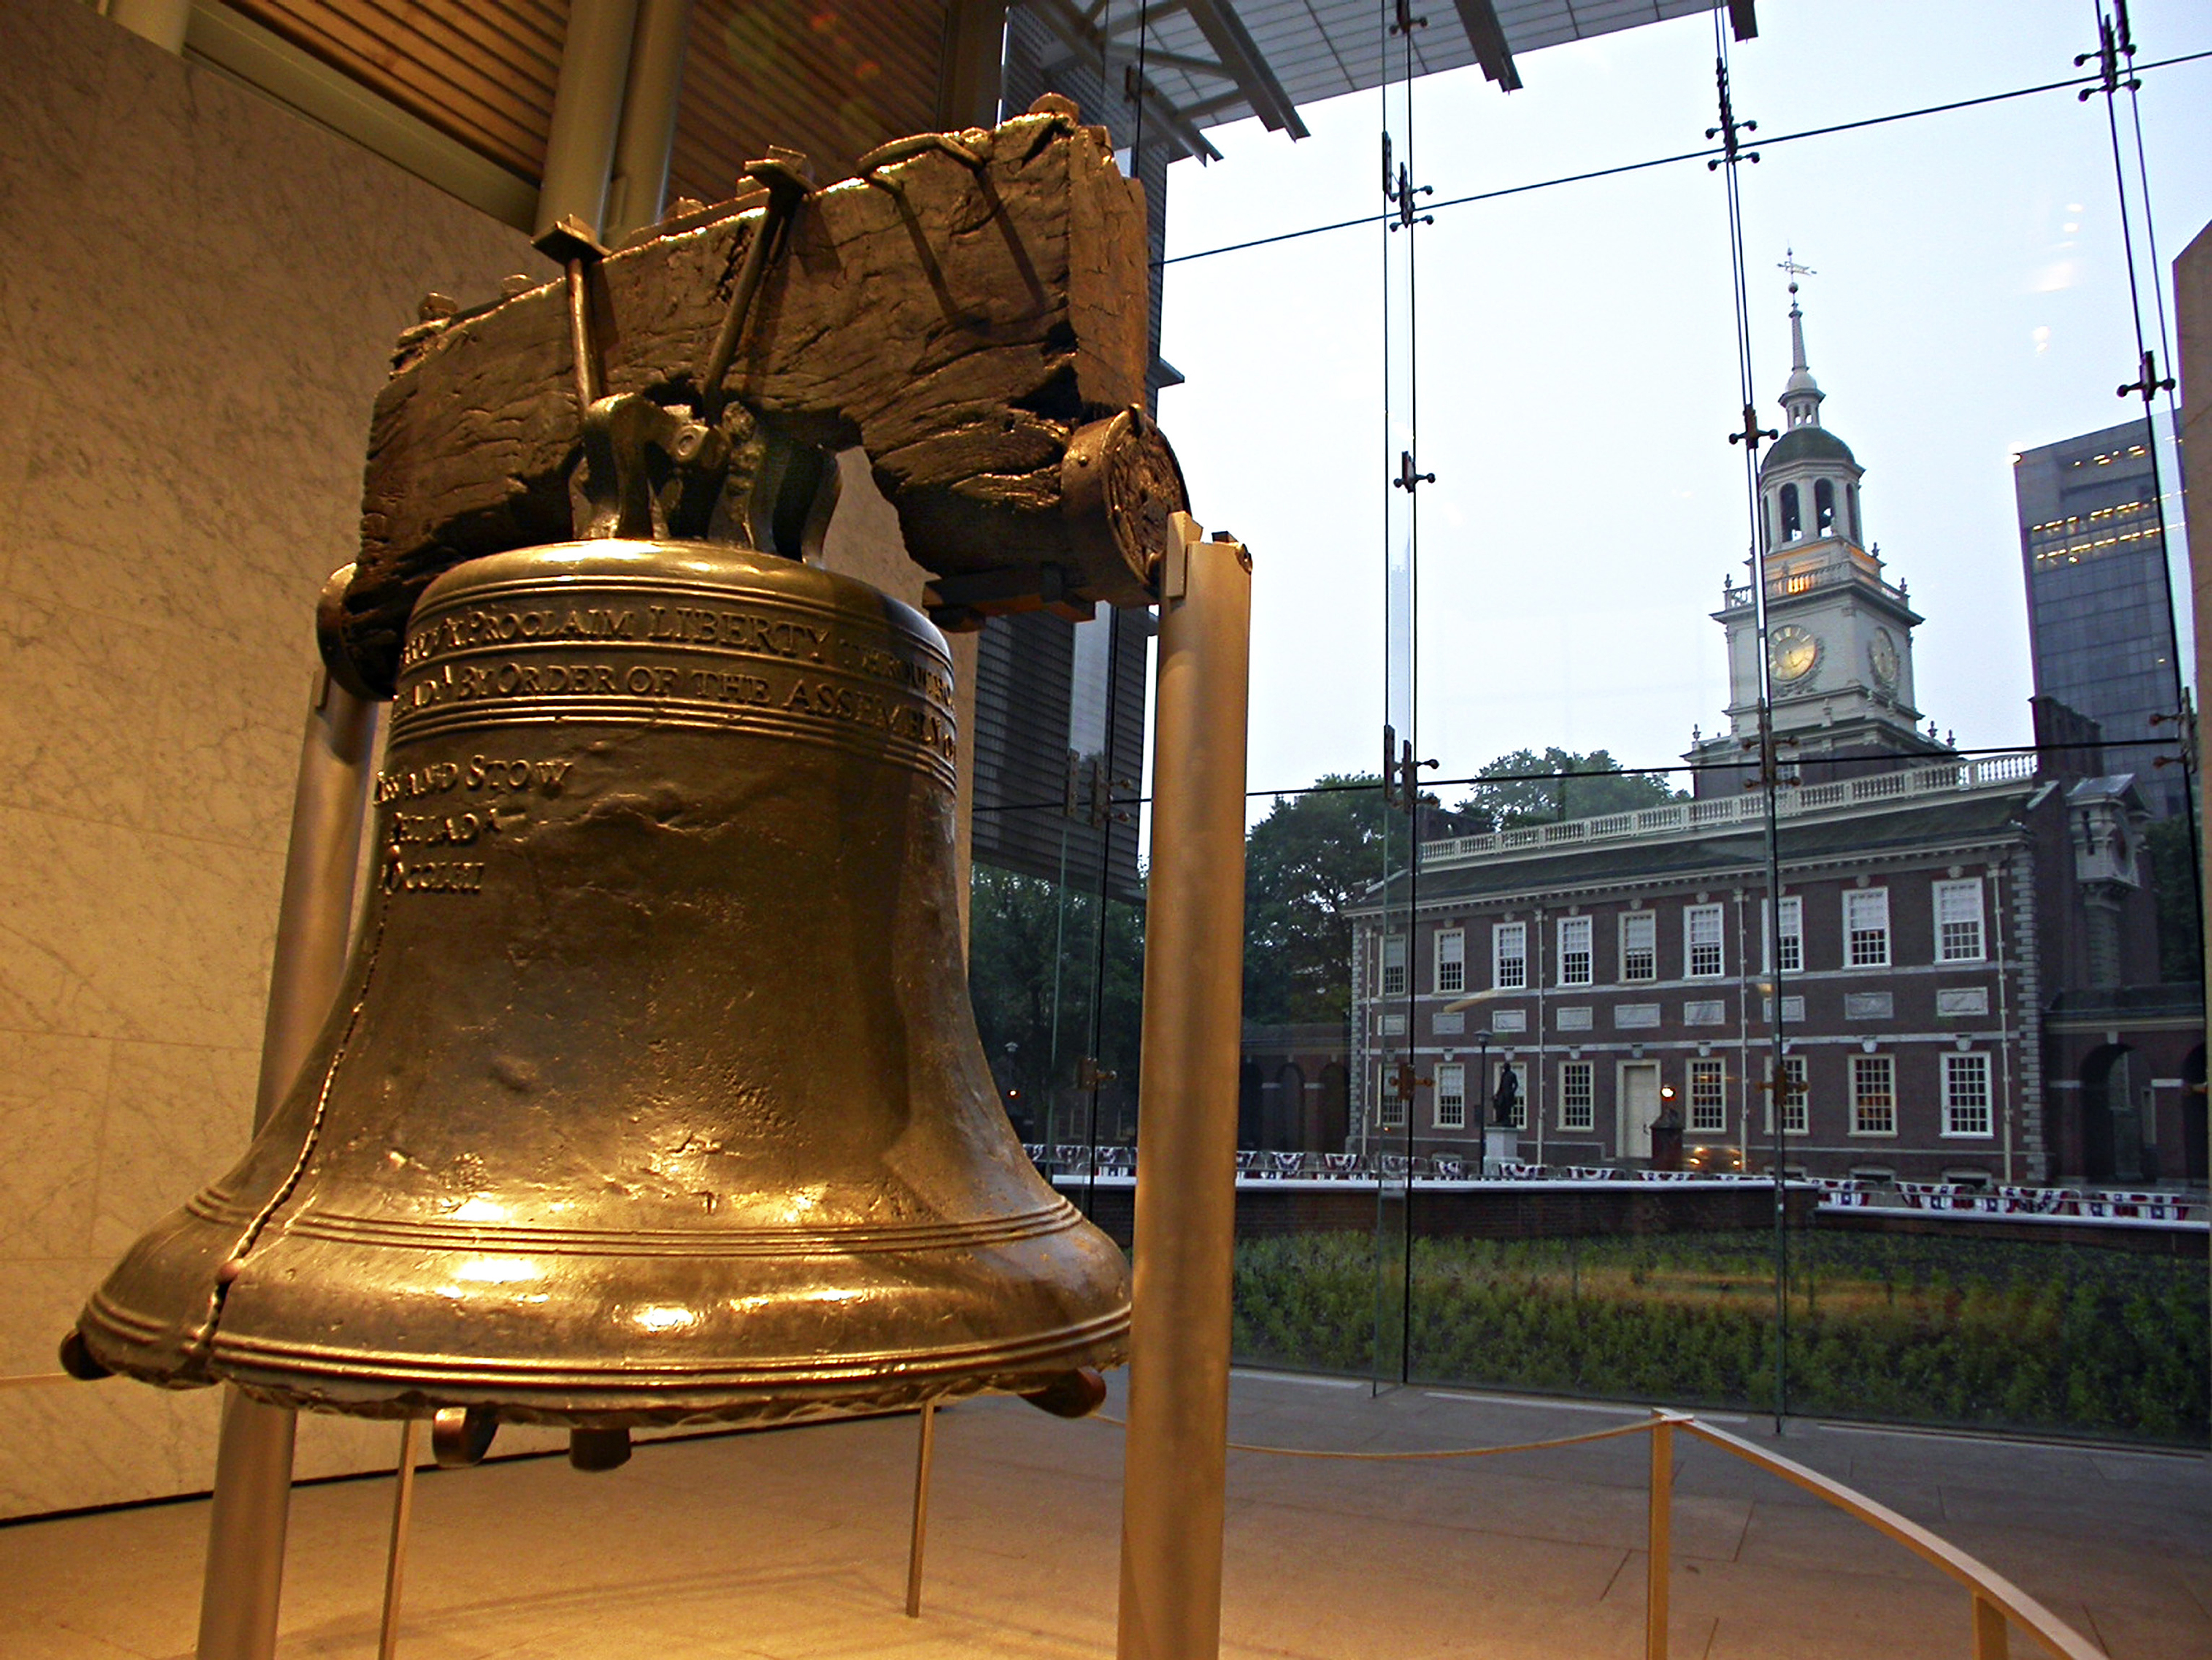 The Liberty Bell in Philadelphia. (Bill Raften—Getty Images)